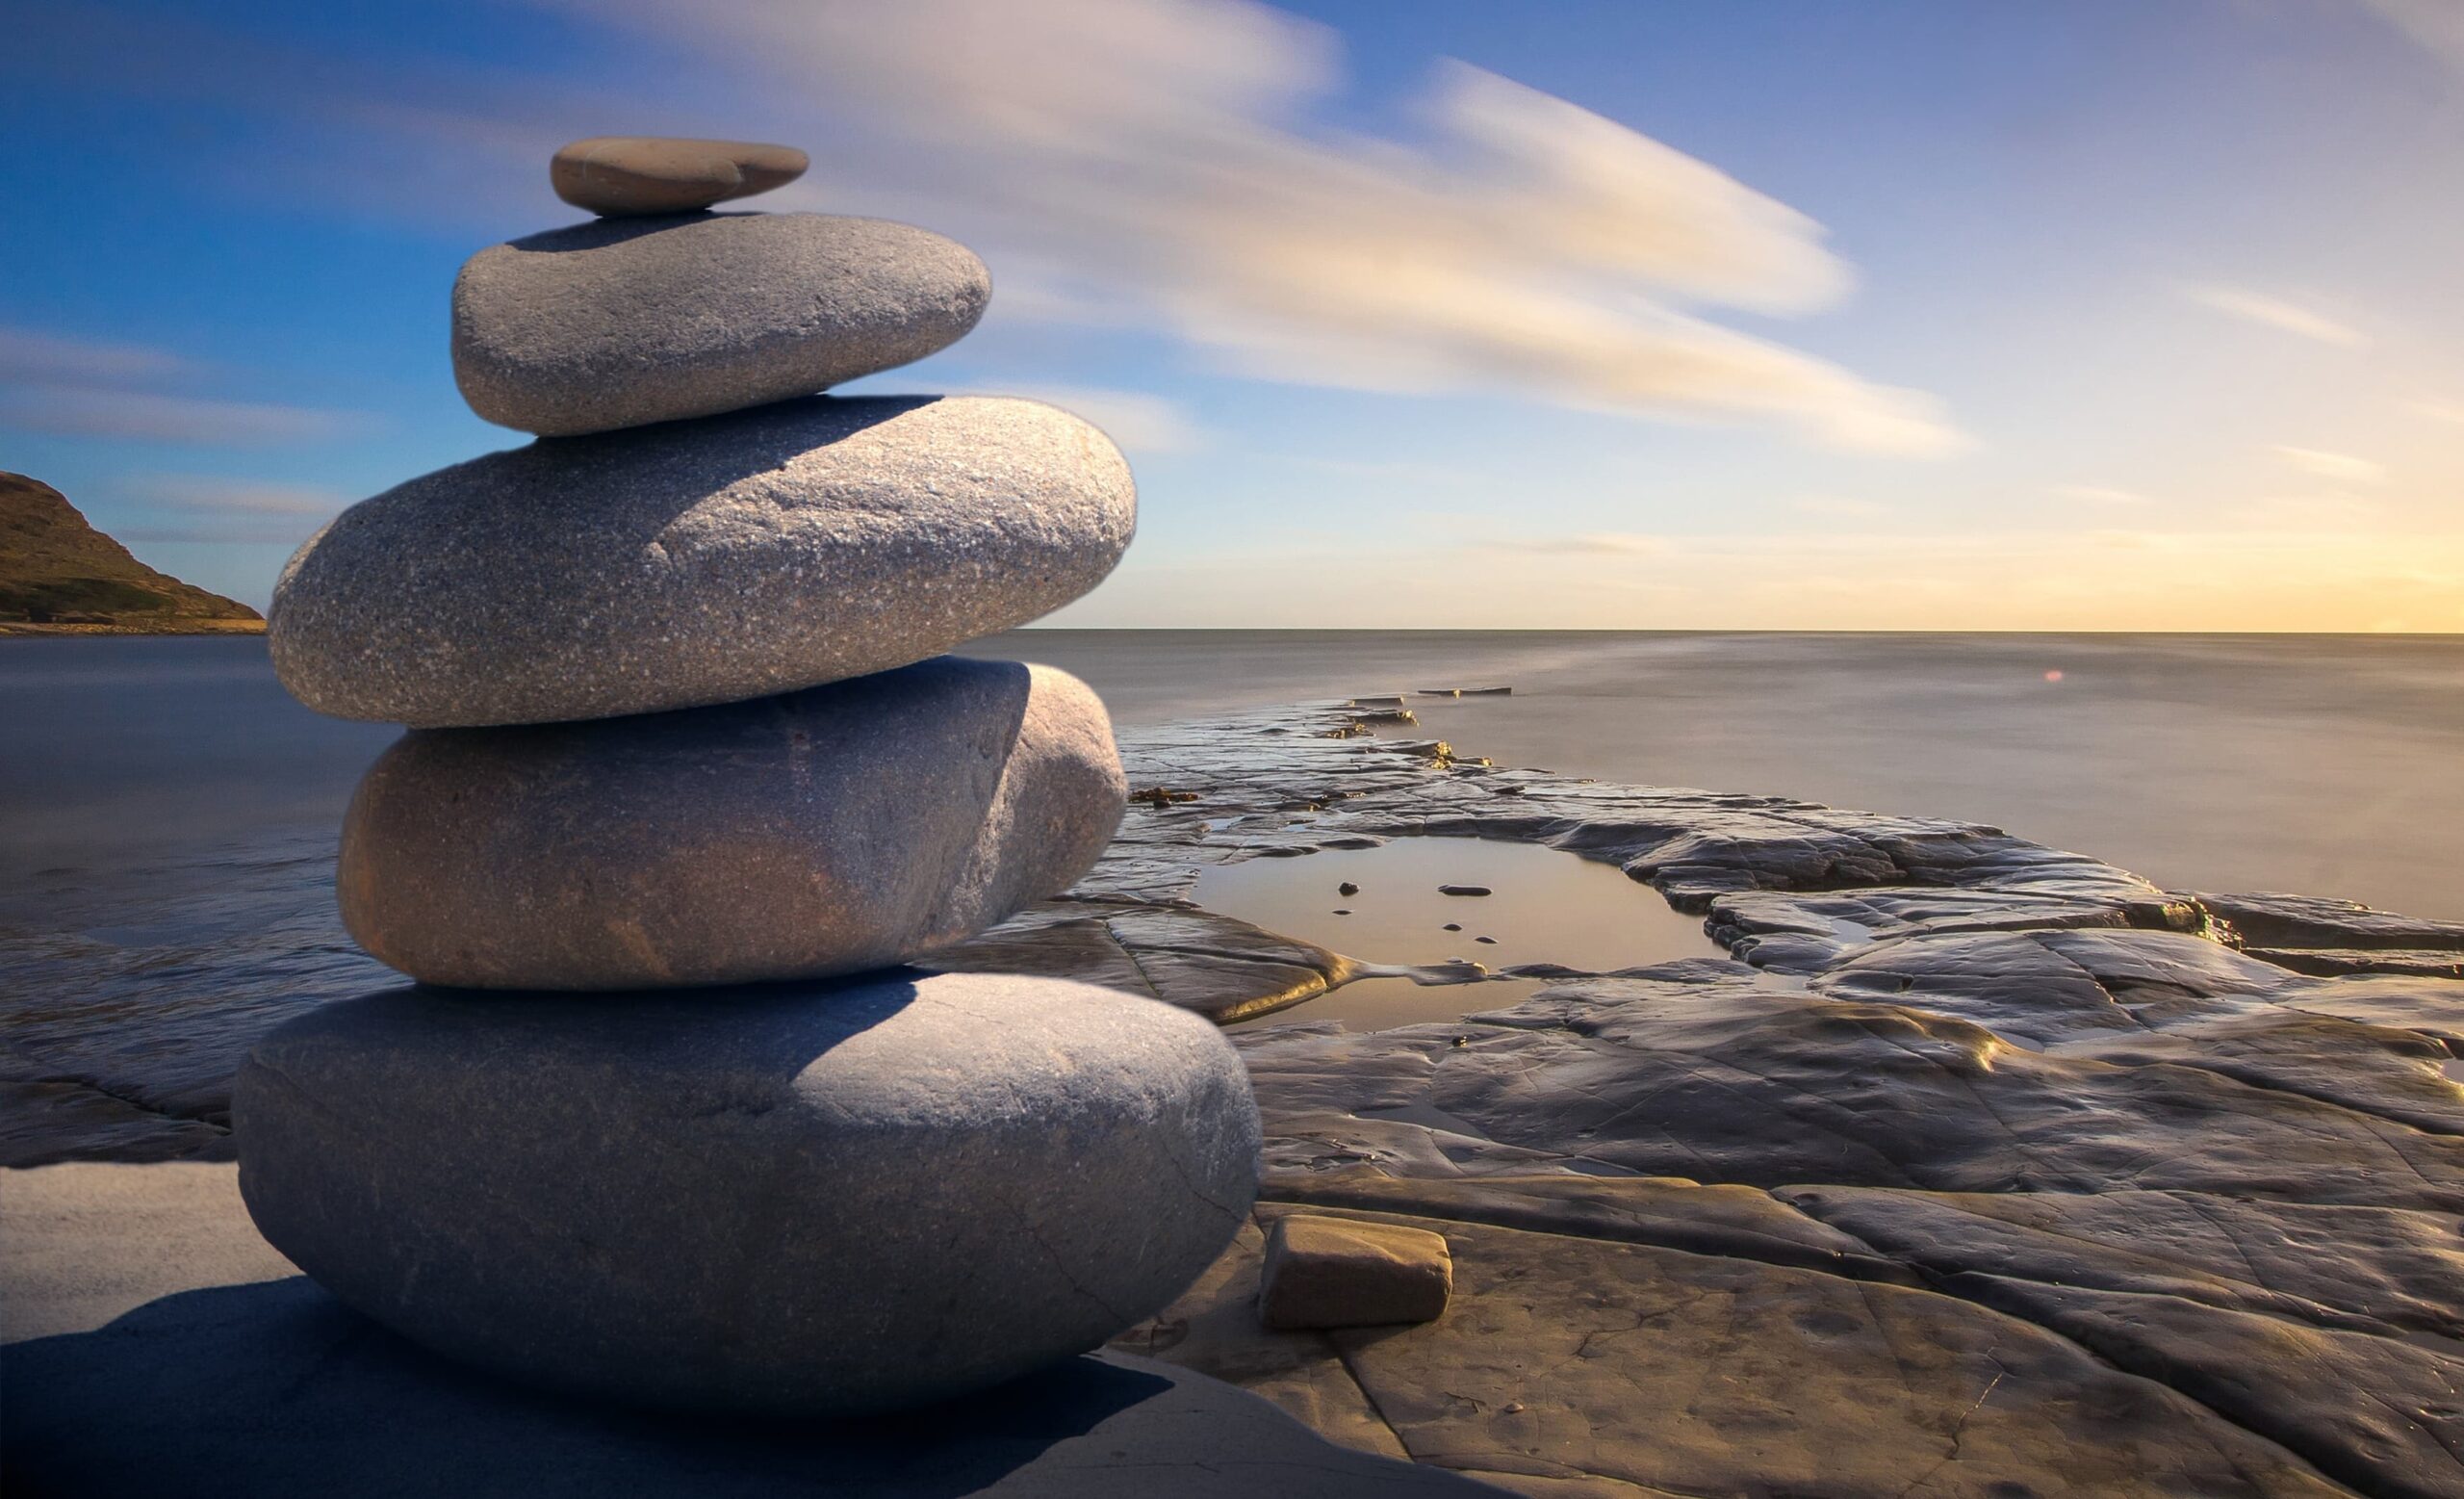 Stones stacked on a beach scaled